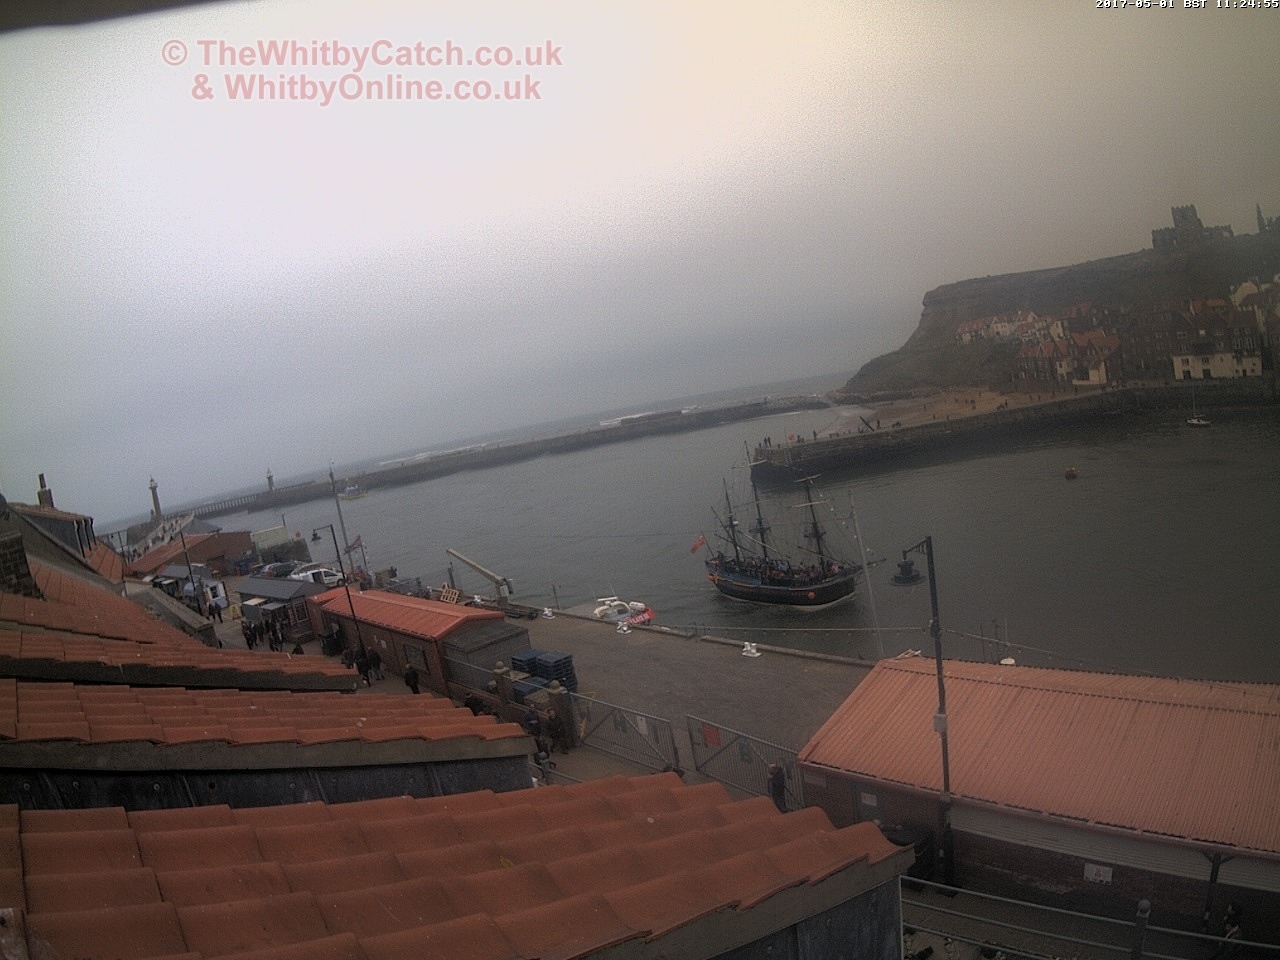 Whitby Mon 1st May 2017 11:25.